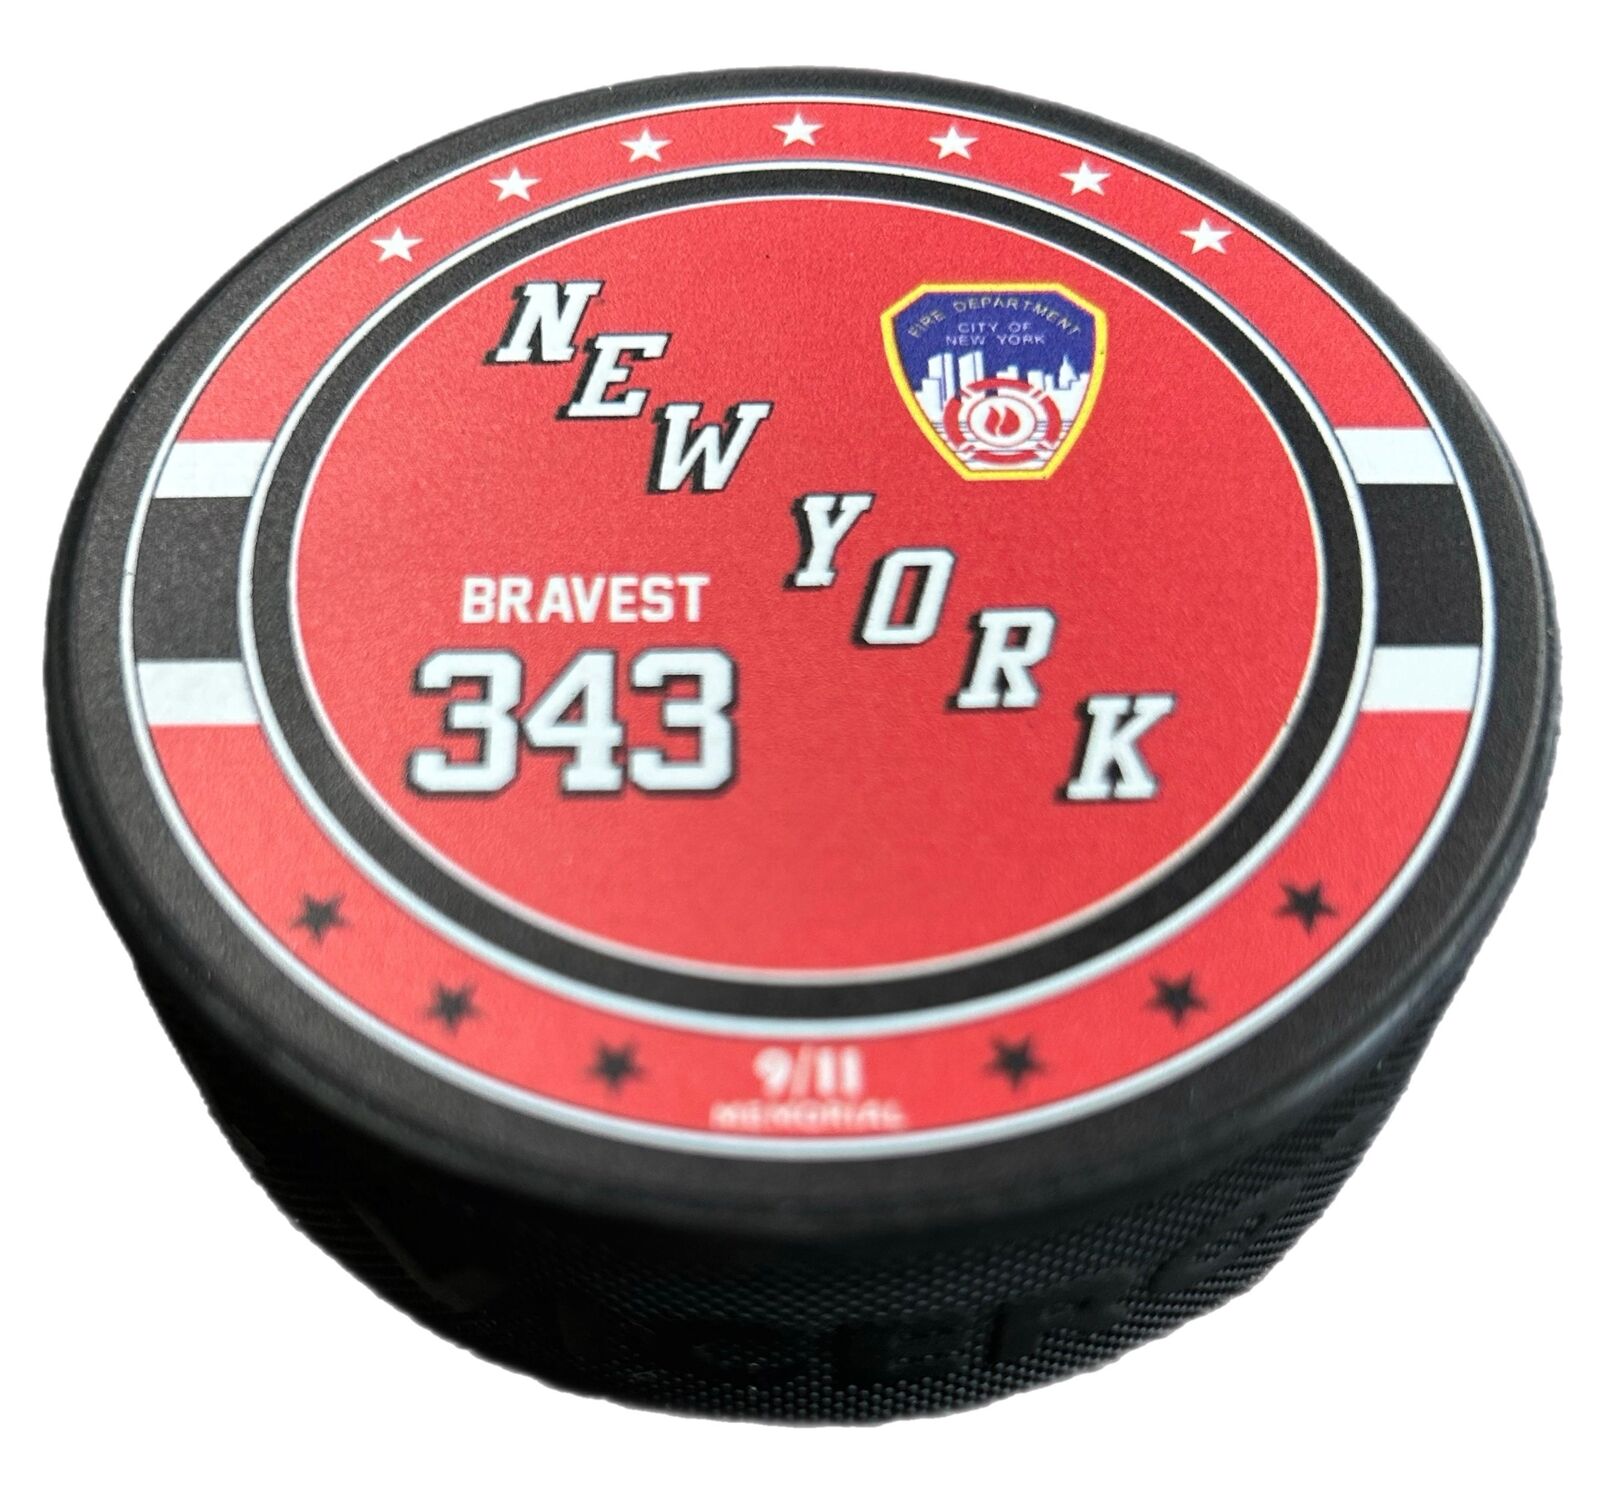 FDNY 343 Official 9/11 Memorial  Hockey Puck to Commemorate The 343 Lives Lost